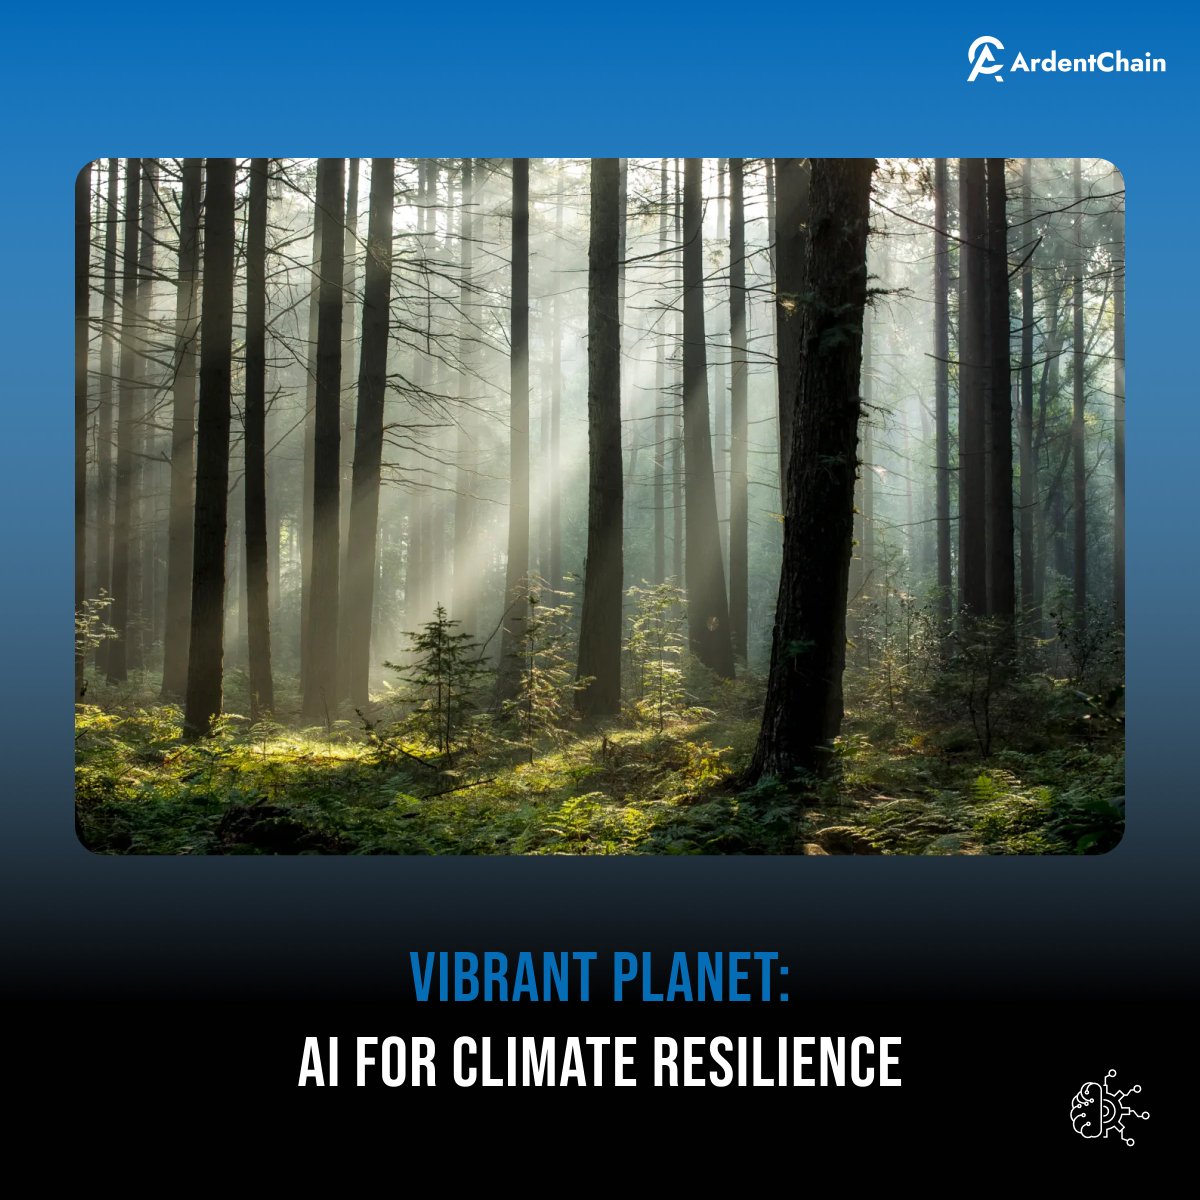 Vibrant Planet uses AI for land mapping, aiding climate resilience, especially in wildfire management. It fosters collaborative planning among stakeholders like fire departments and indigenous groups, improving land management strategies.

#VibrantPlanet #AI